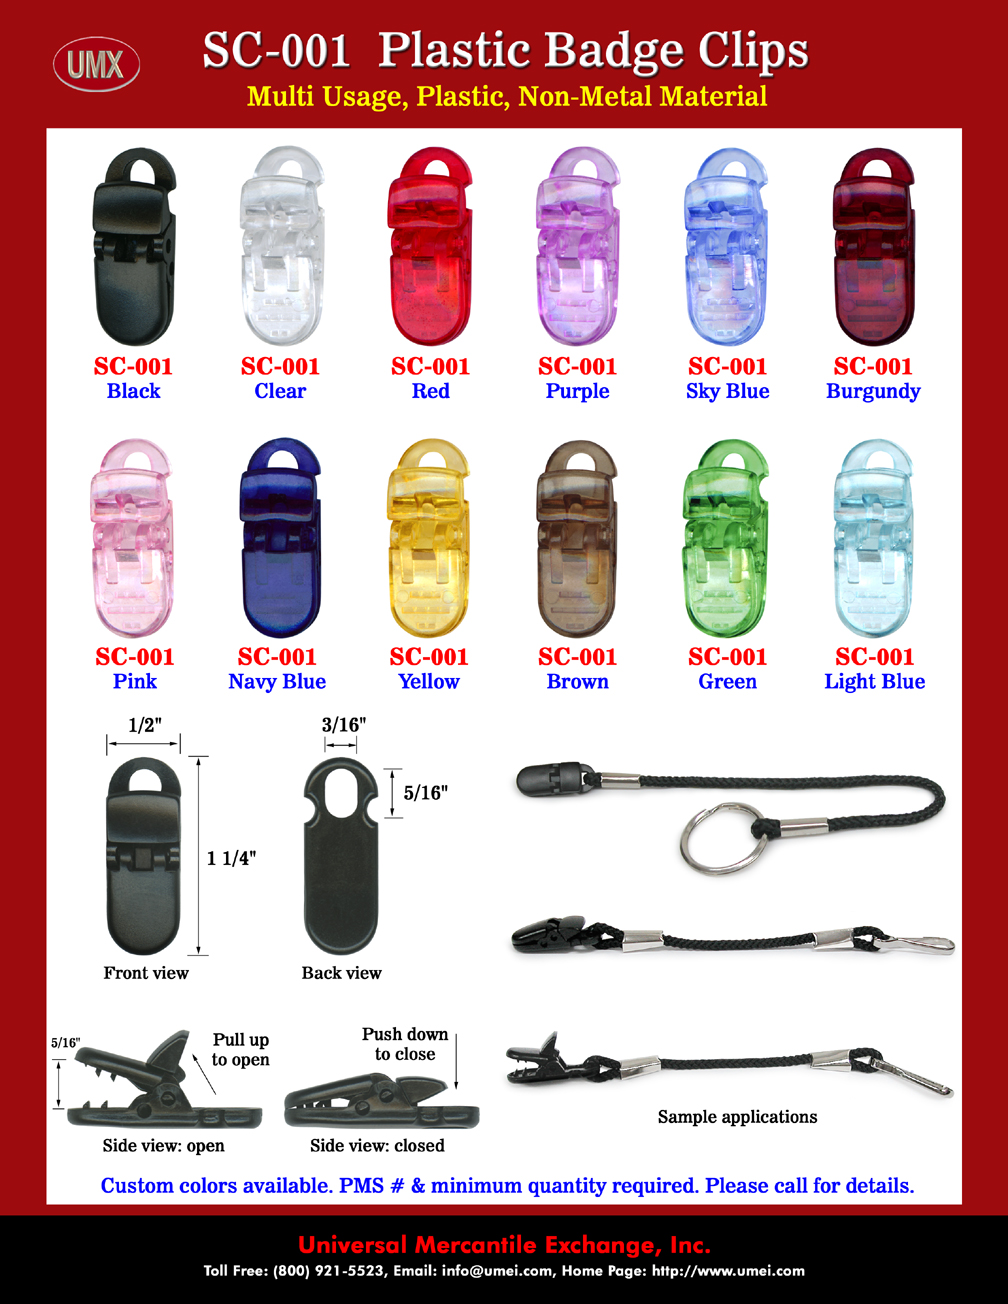 Plastic Clips For Name Badges, ID Cards, or Badge Holders